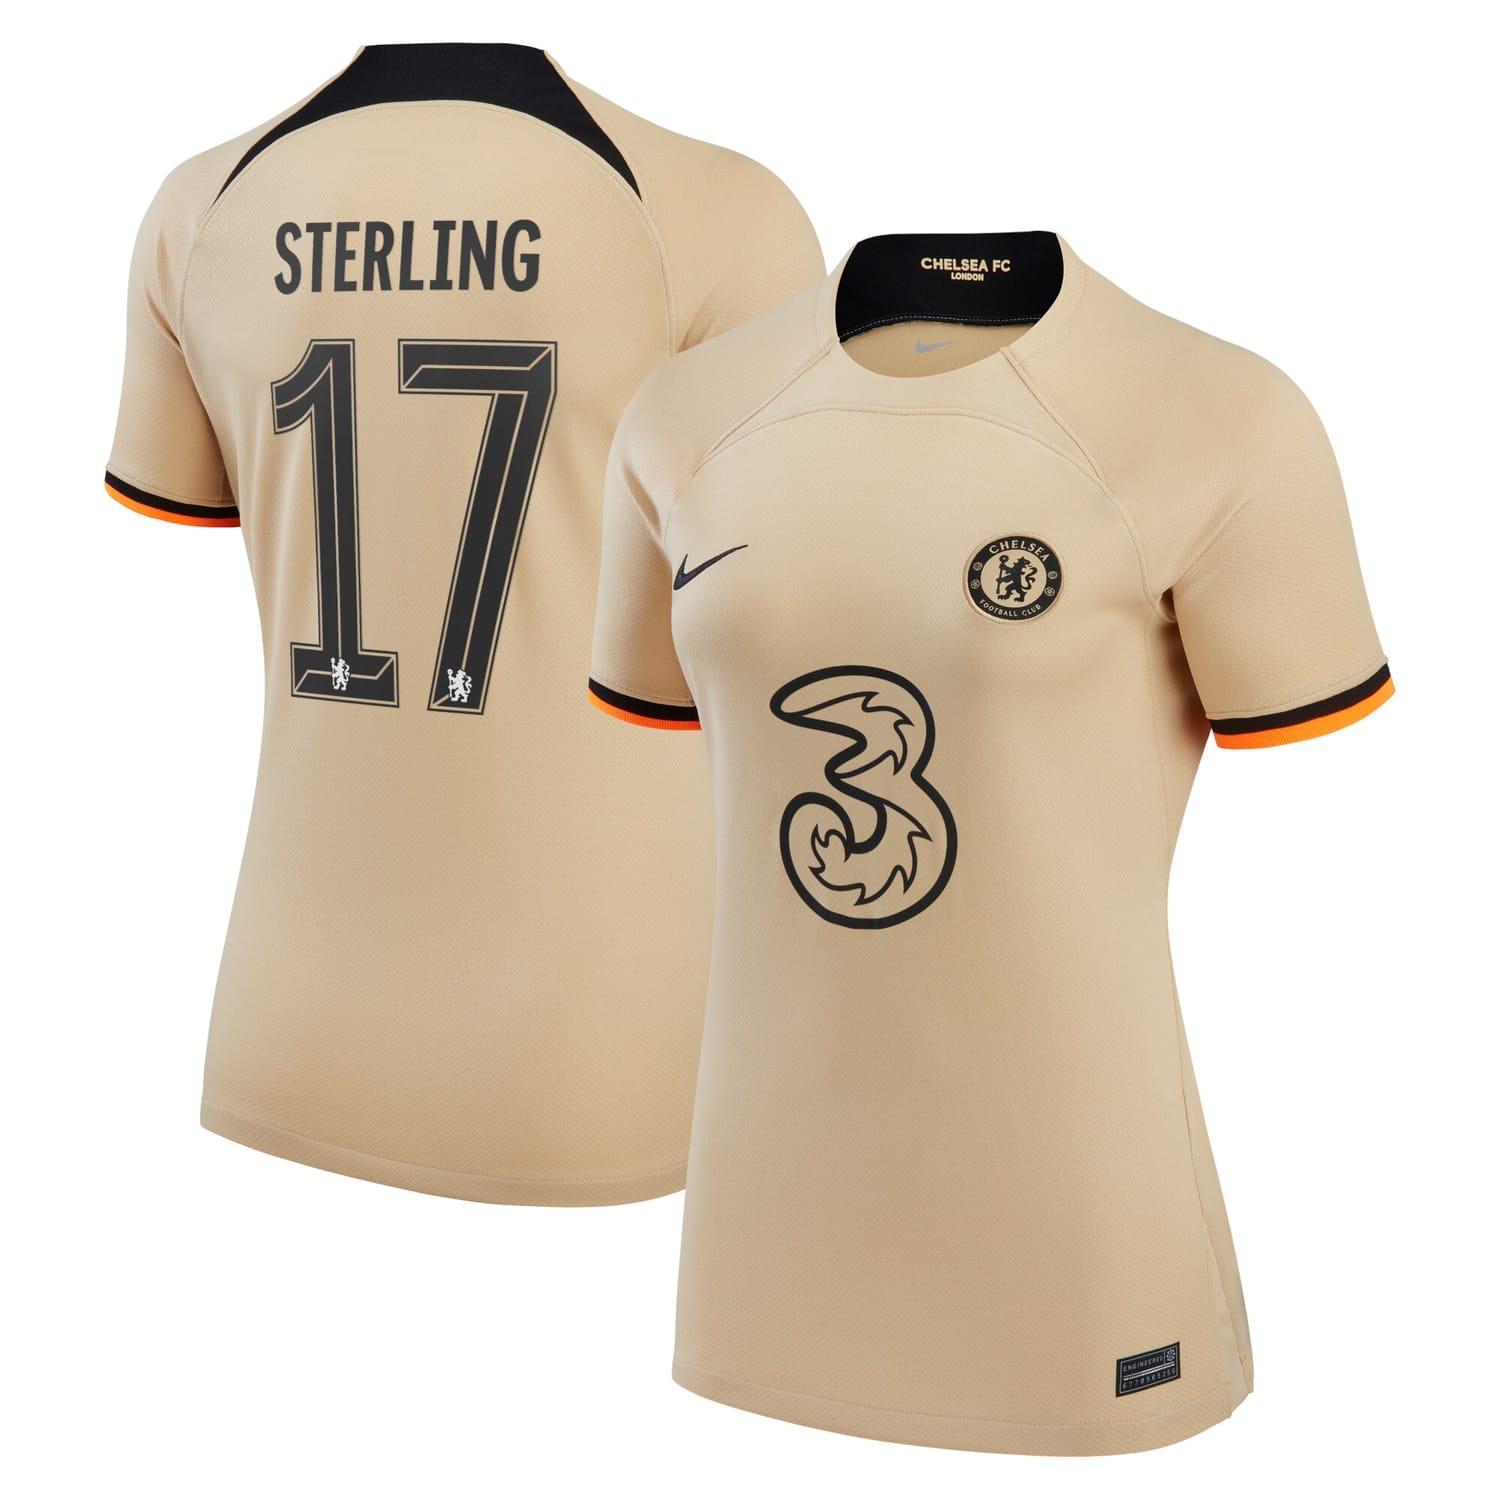 Premier League Chelsea Third Cup Jersey Shirt 2022-23 player Raheem Sterling 17 printing for Women